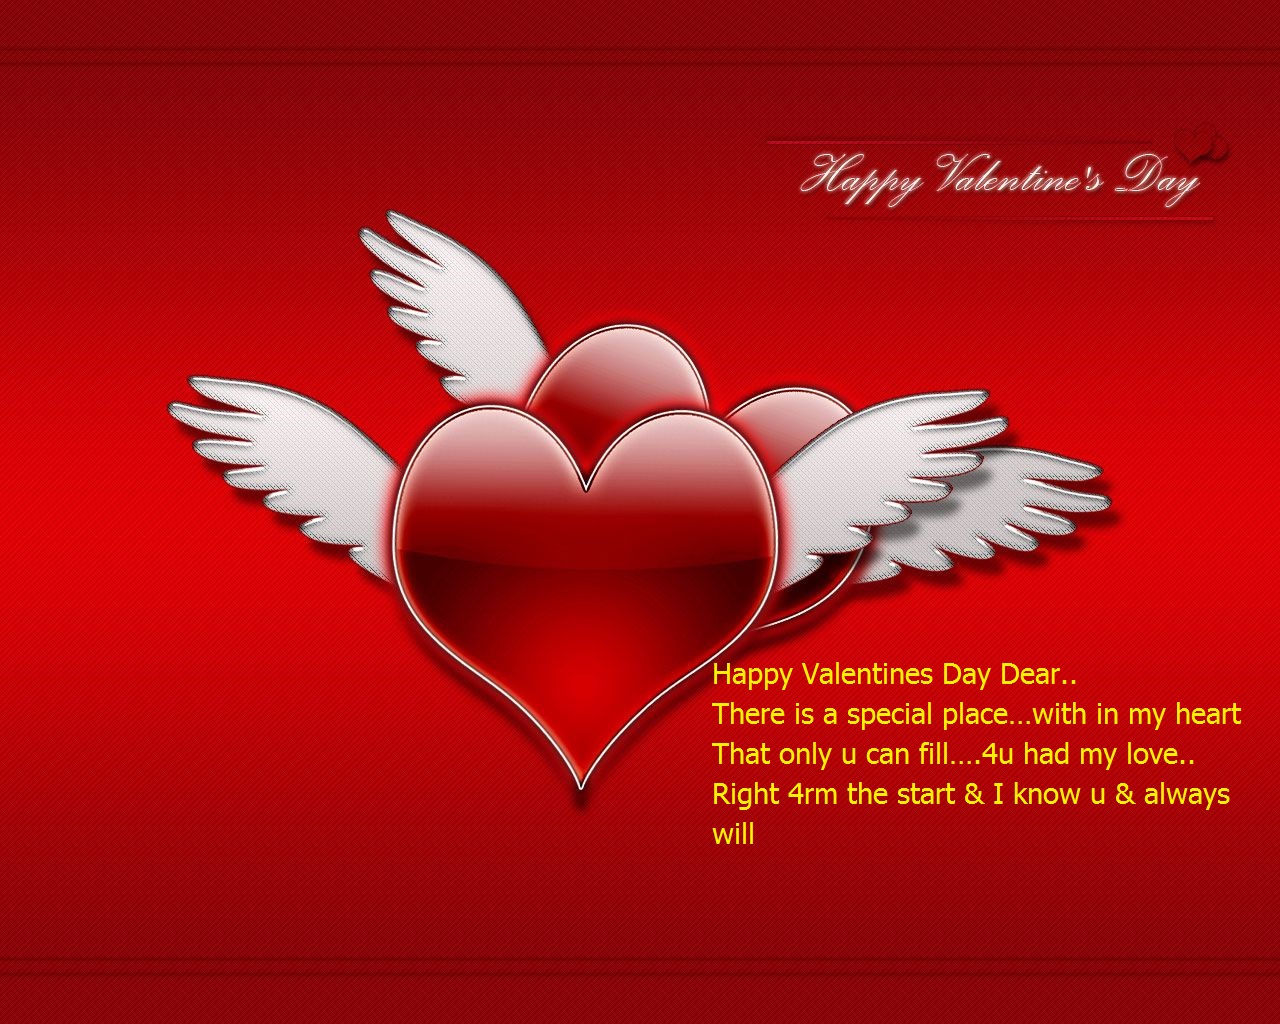 Happy Valentines Day Wishes For You Love Spouse And Friends